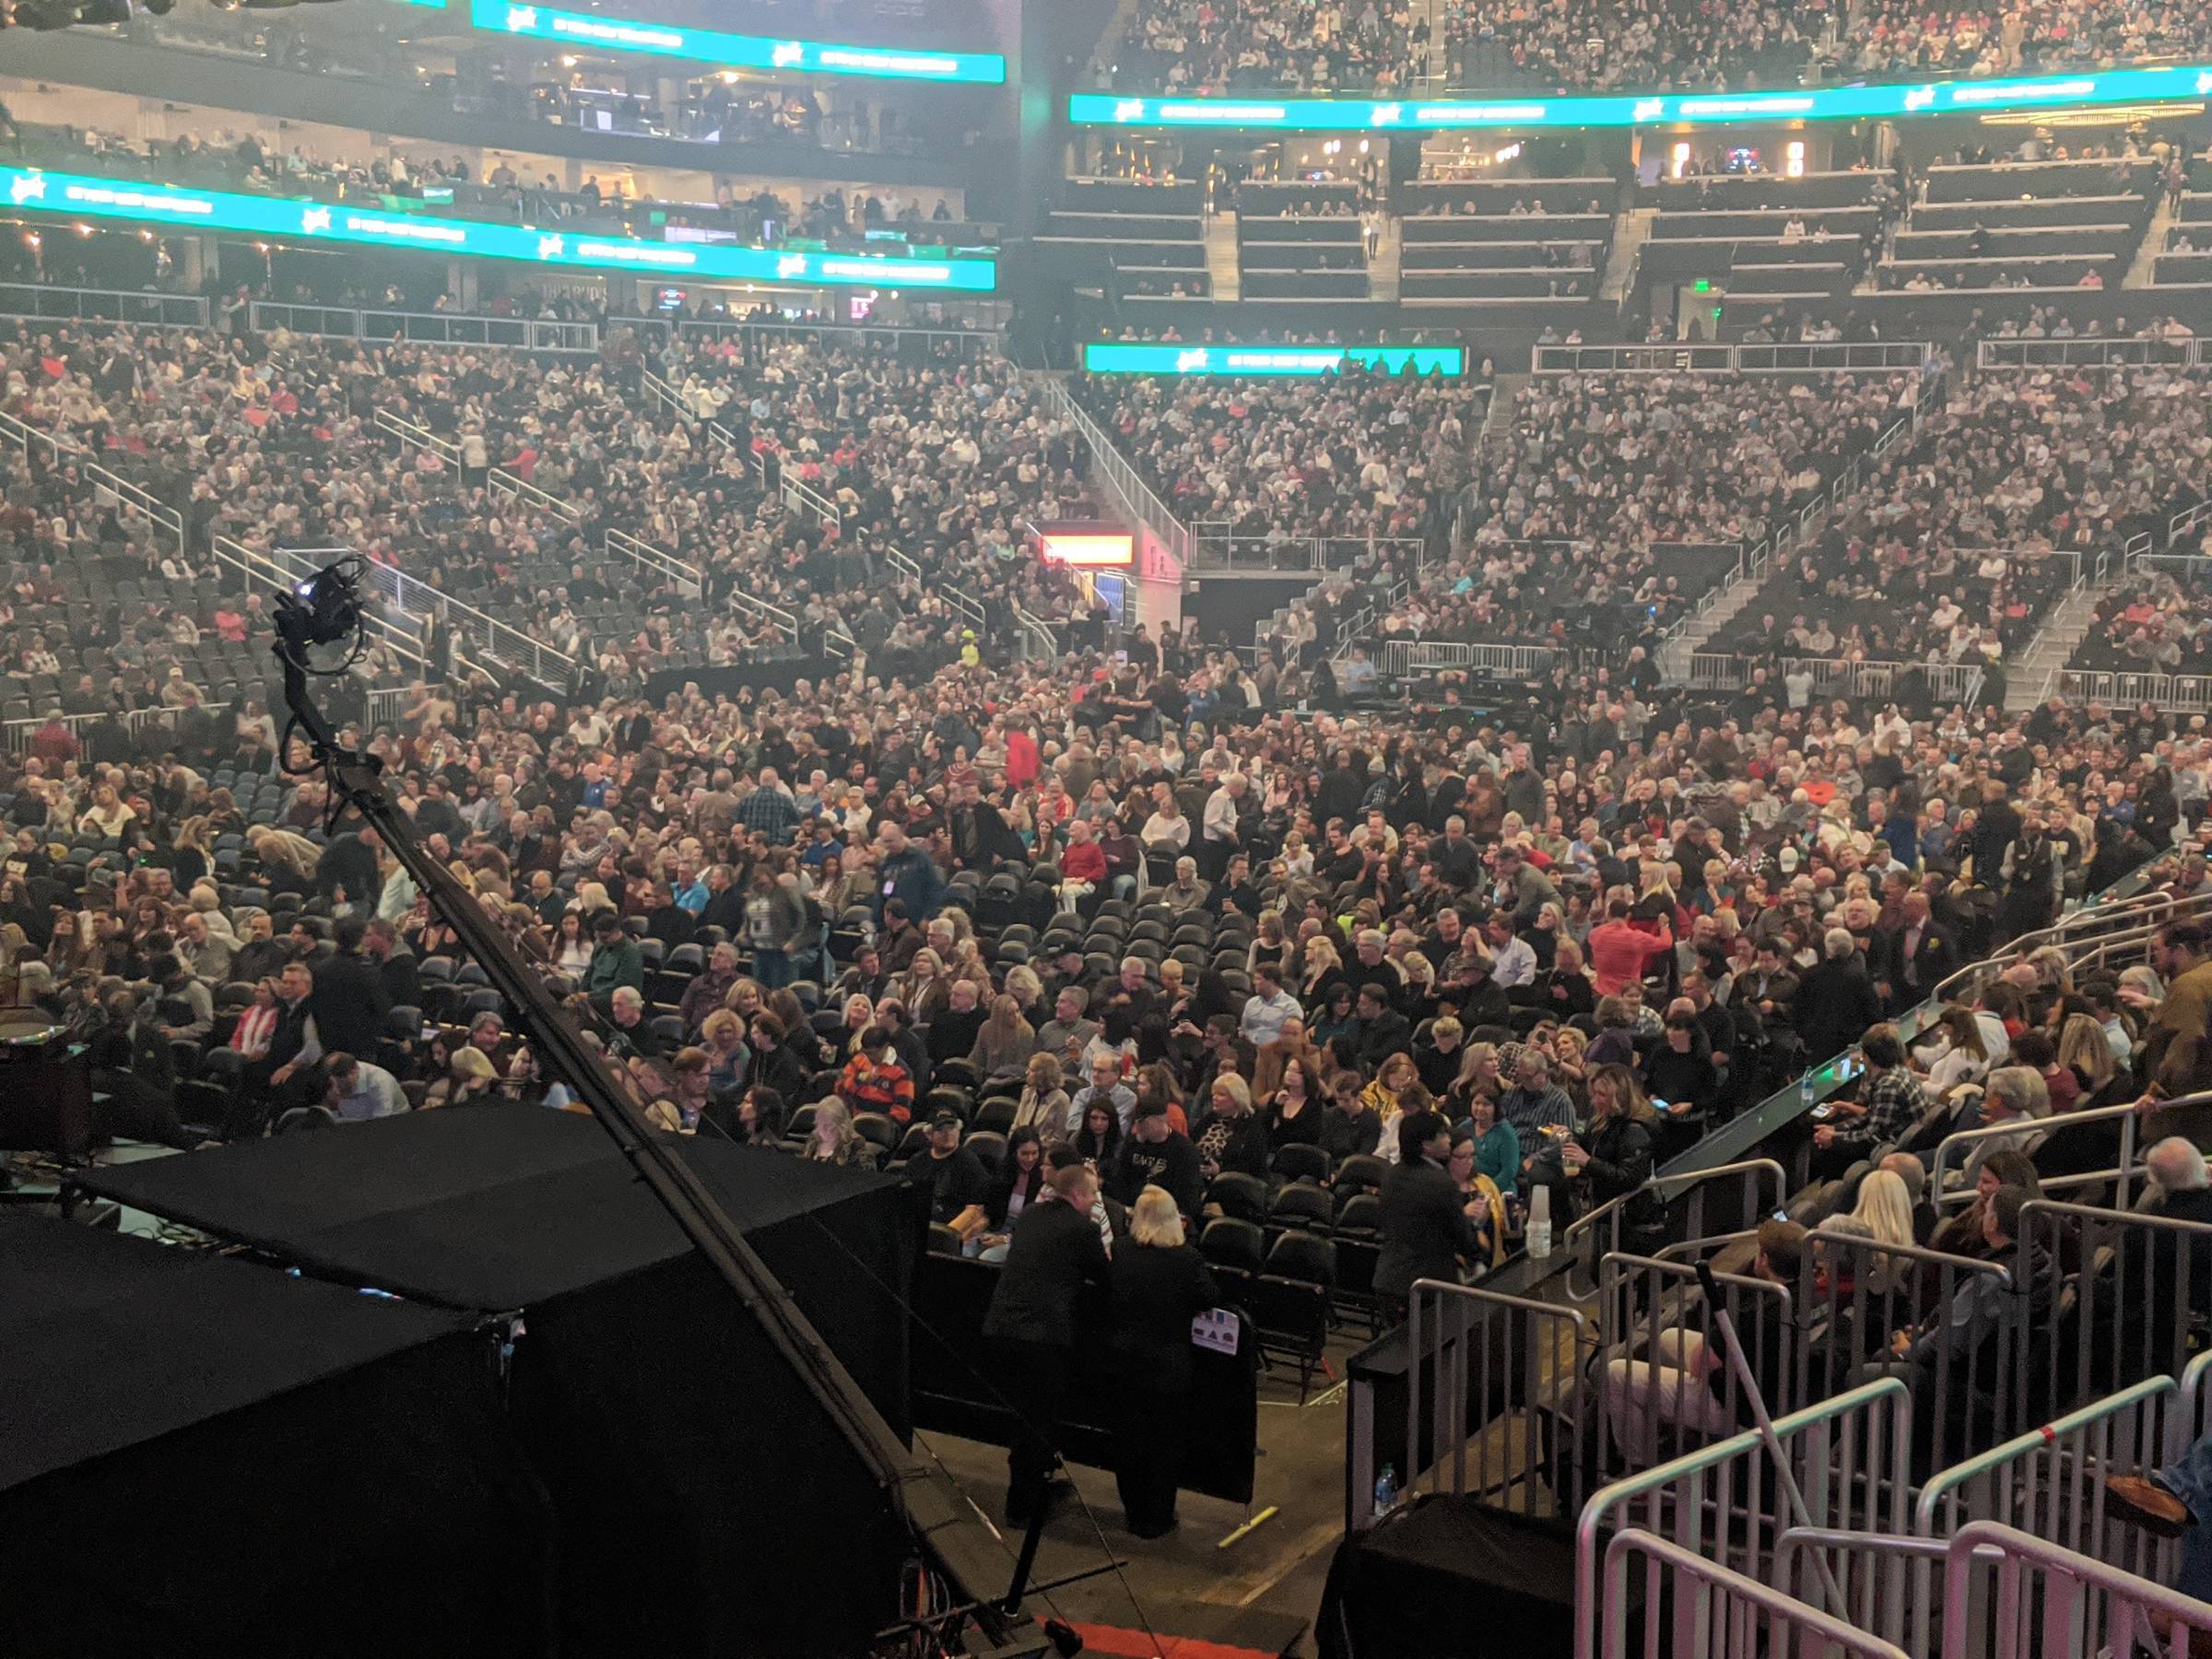 Floor Seats for the Eagles